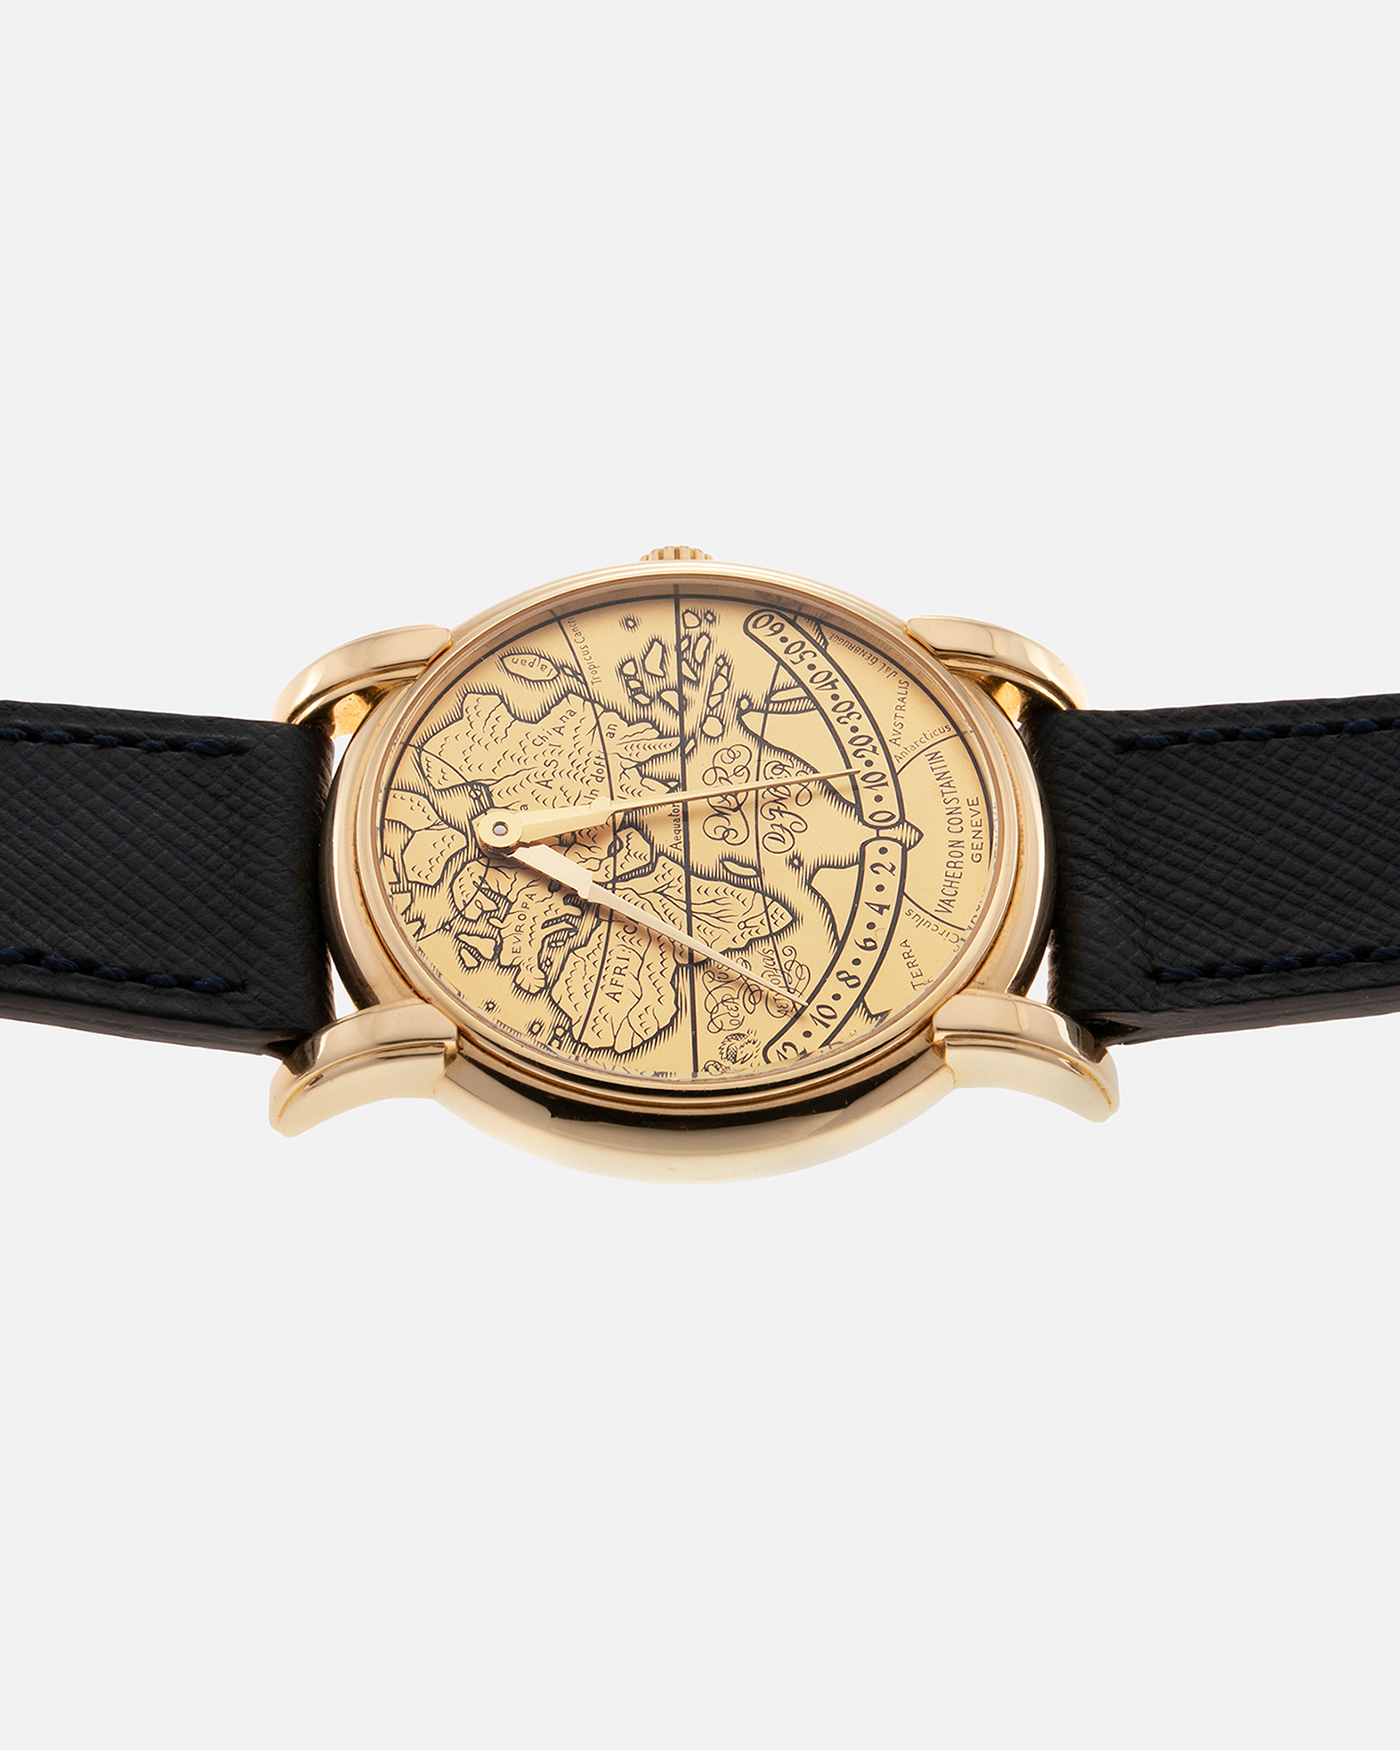 Brand: Vacheron Constantin Year: 1994 Model: Mercator Reference Number: 43050 Material: 18-carat Yellow Gold Case and Engraved Dial filled with Black Enamel Movement: Vacheron Constantin Cal. 1120 M, Self-Winding Case Diameter: 36mm Strap: Molequin Navy Blue Textured Calf Leather Strap with Signed 18-carat Yellow Gold Deployant